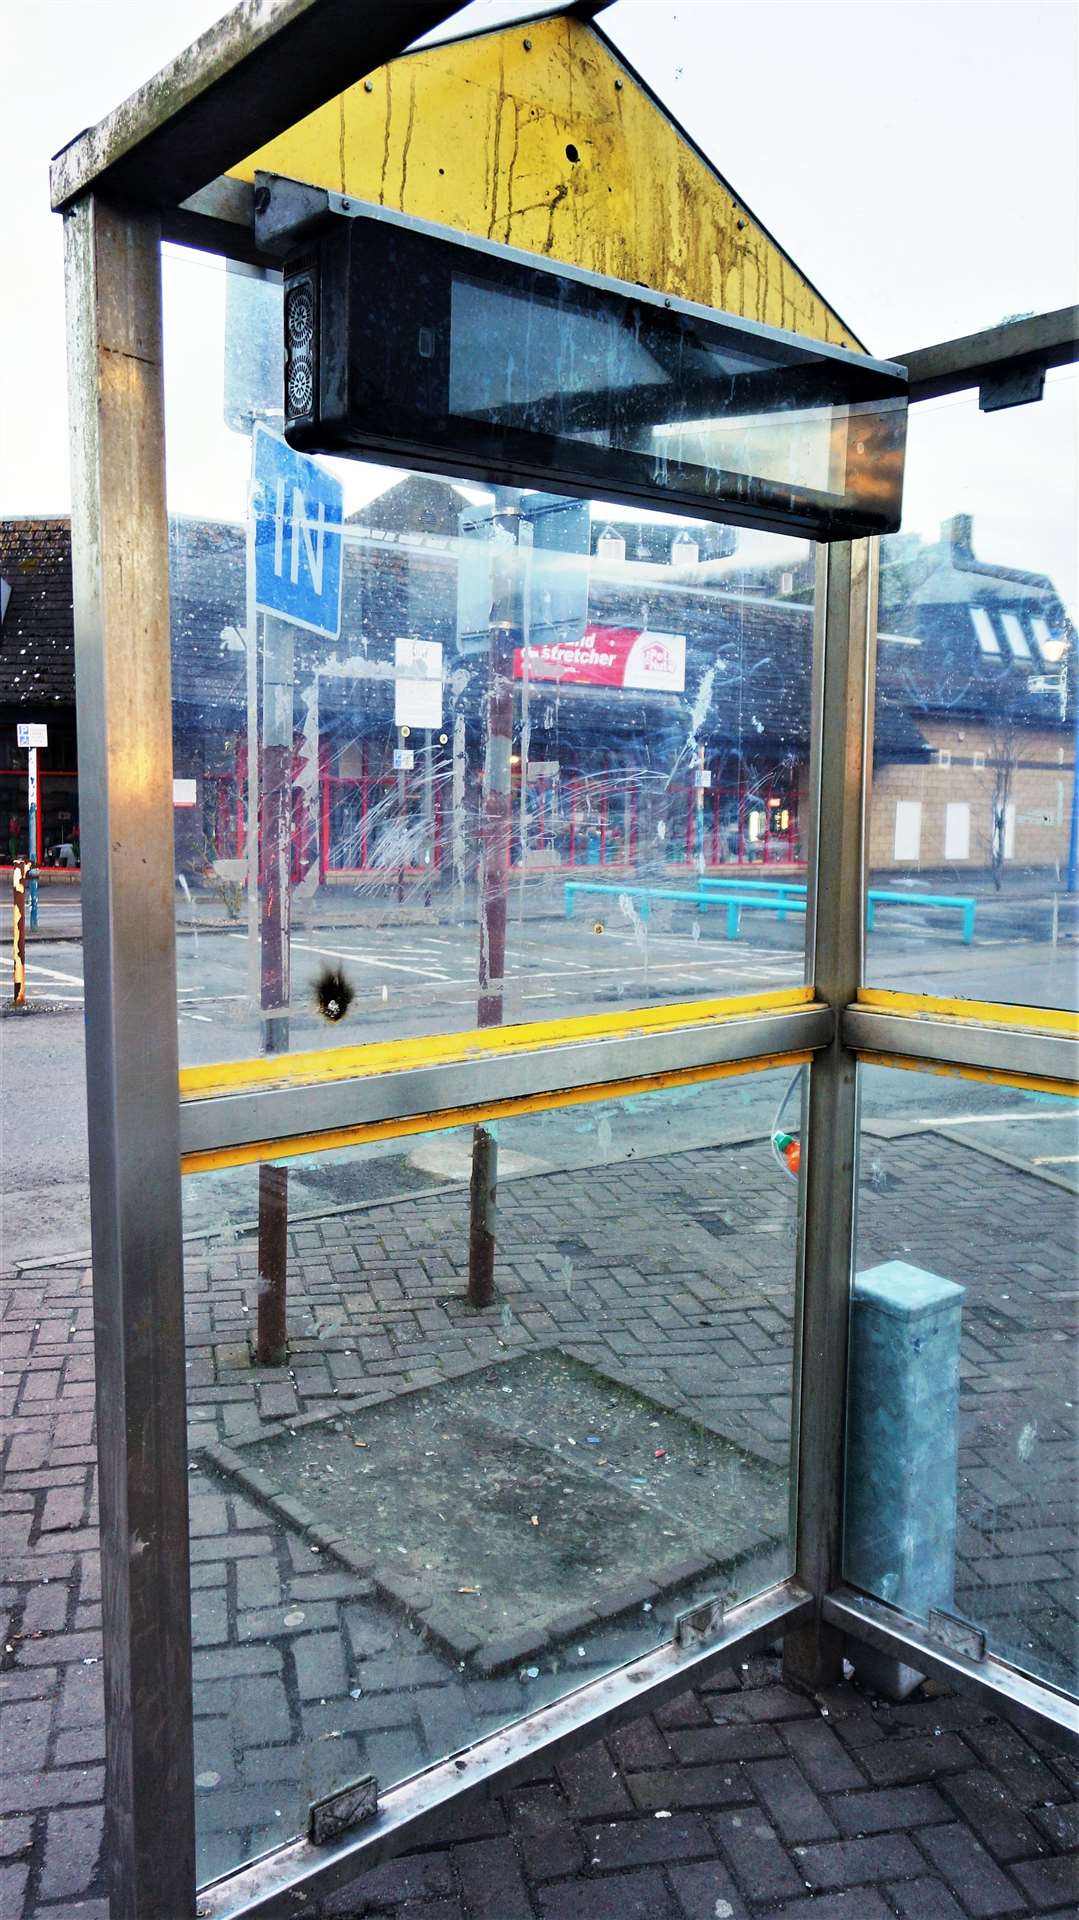 Another view of the busted bus stop.